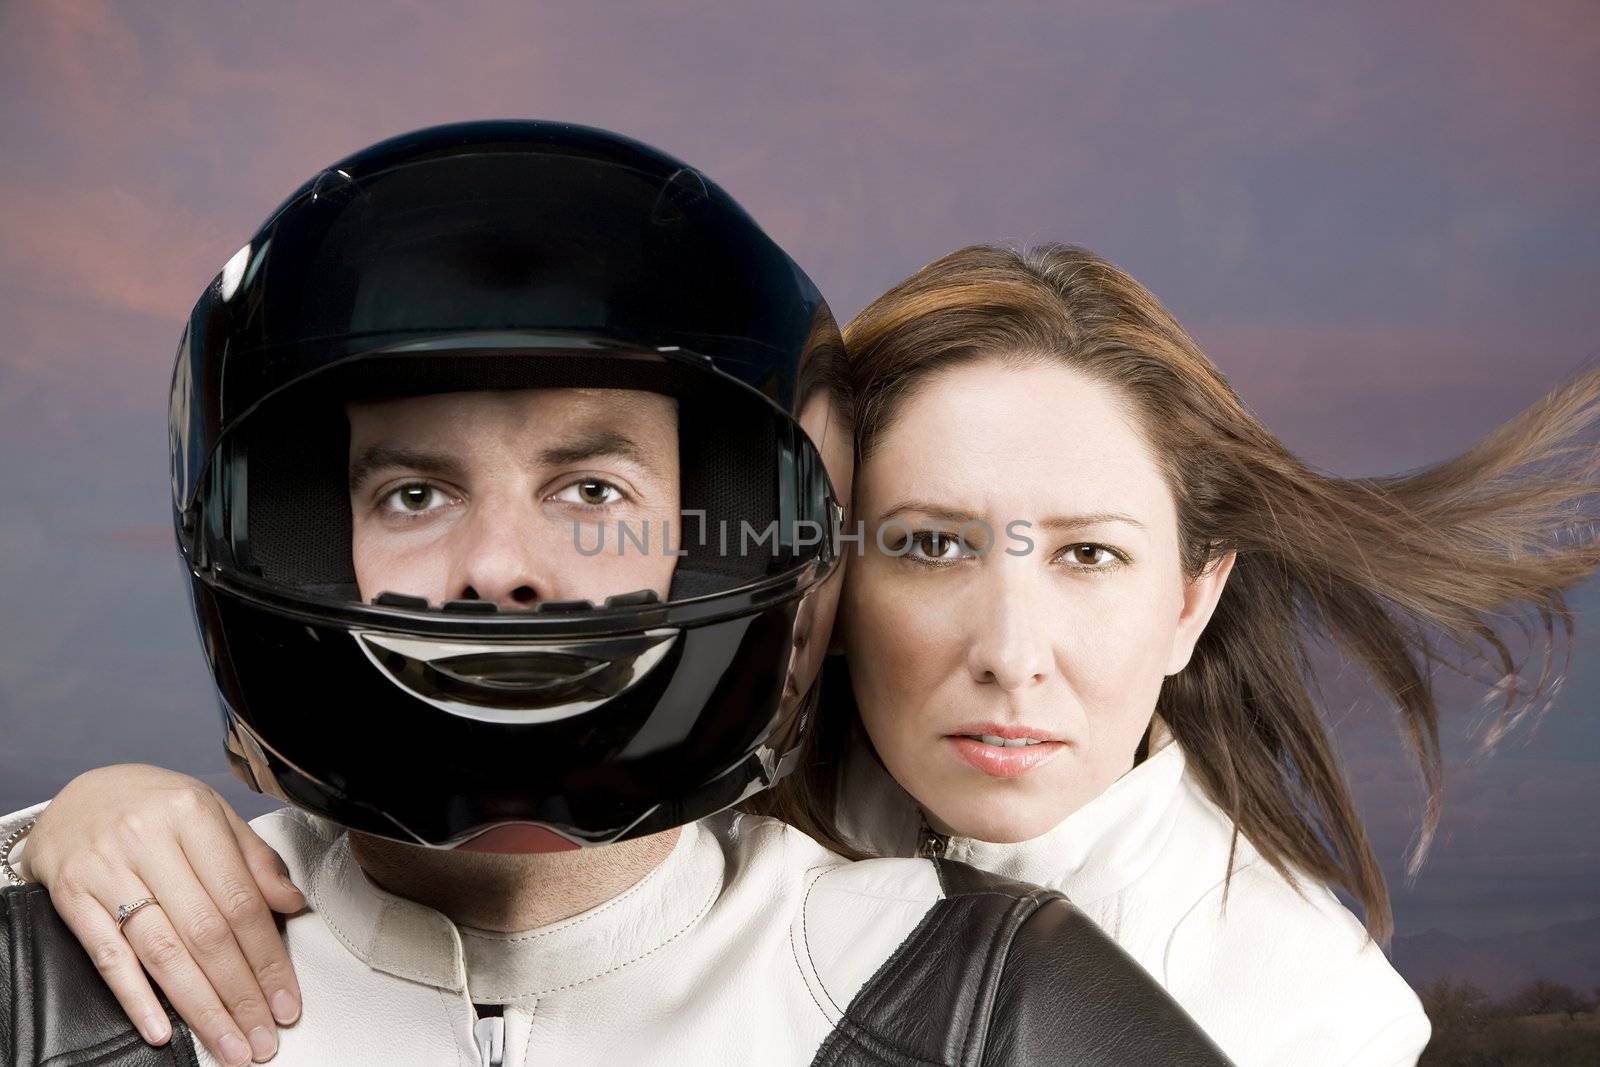 Man and woman on a motorcycle in studio